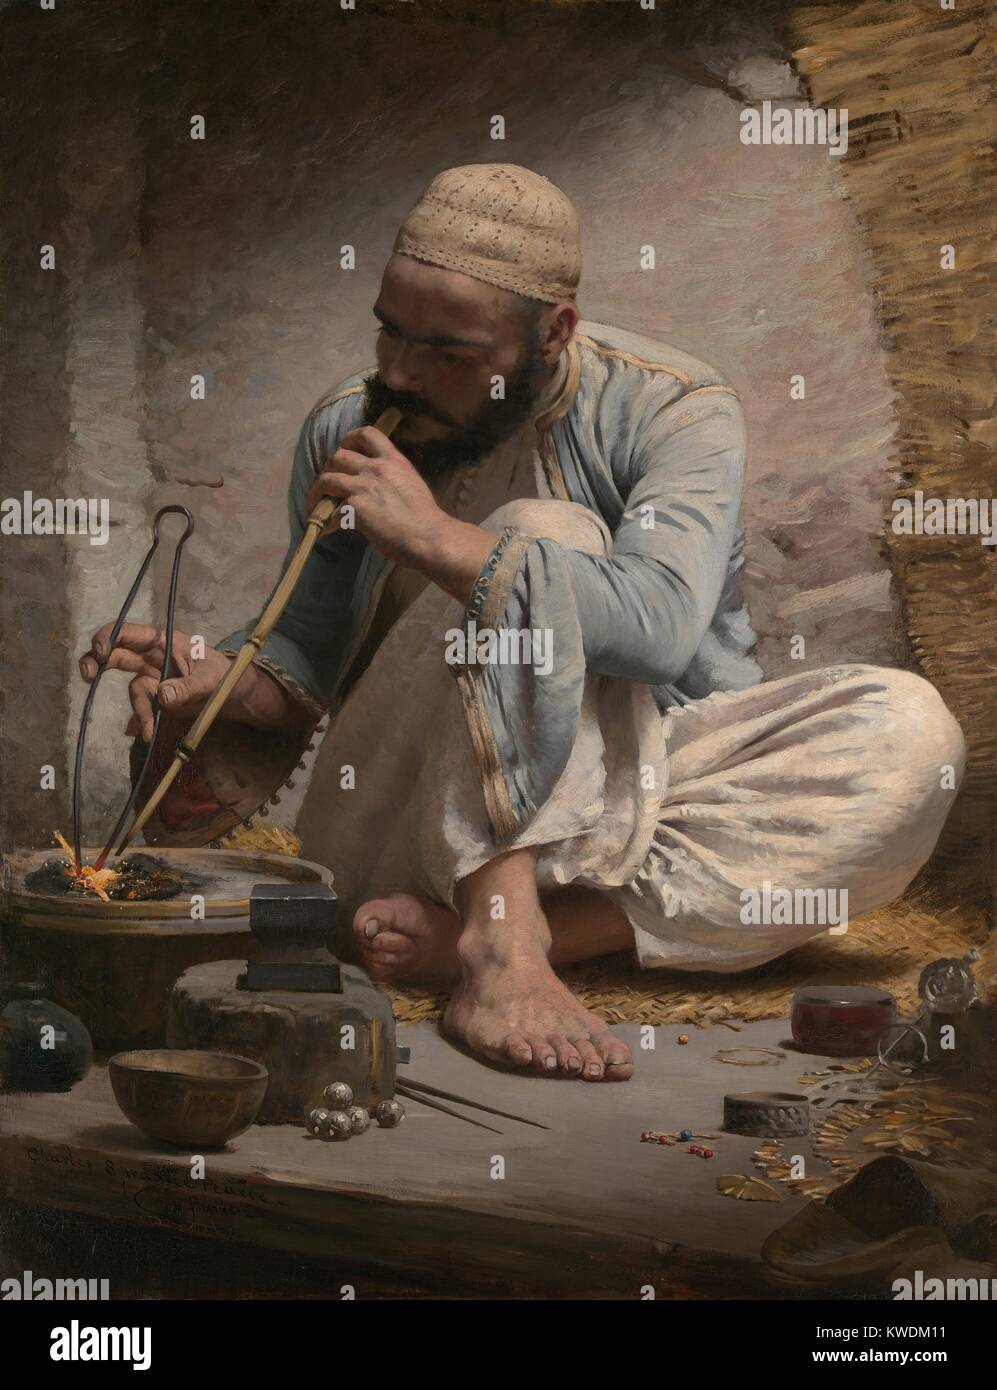 THE ARAB JEWELER, by Charles Sprague Pearce, 1882, American painting, oil on canvas. An Arab artisan is painted with strong sense of light and volume. The artist studied in Paris and traveled to Egypt in the 1870s. (BSLOC 2017 10 107) Stock Photo